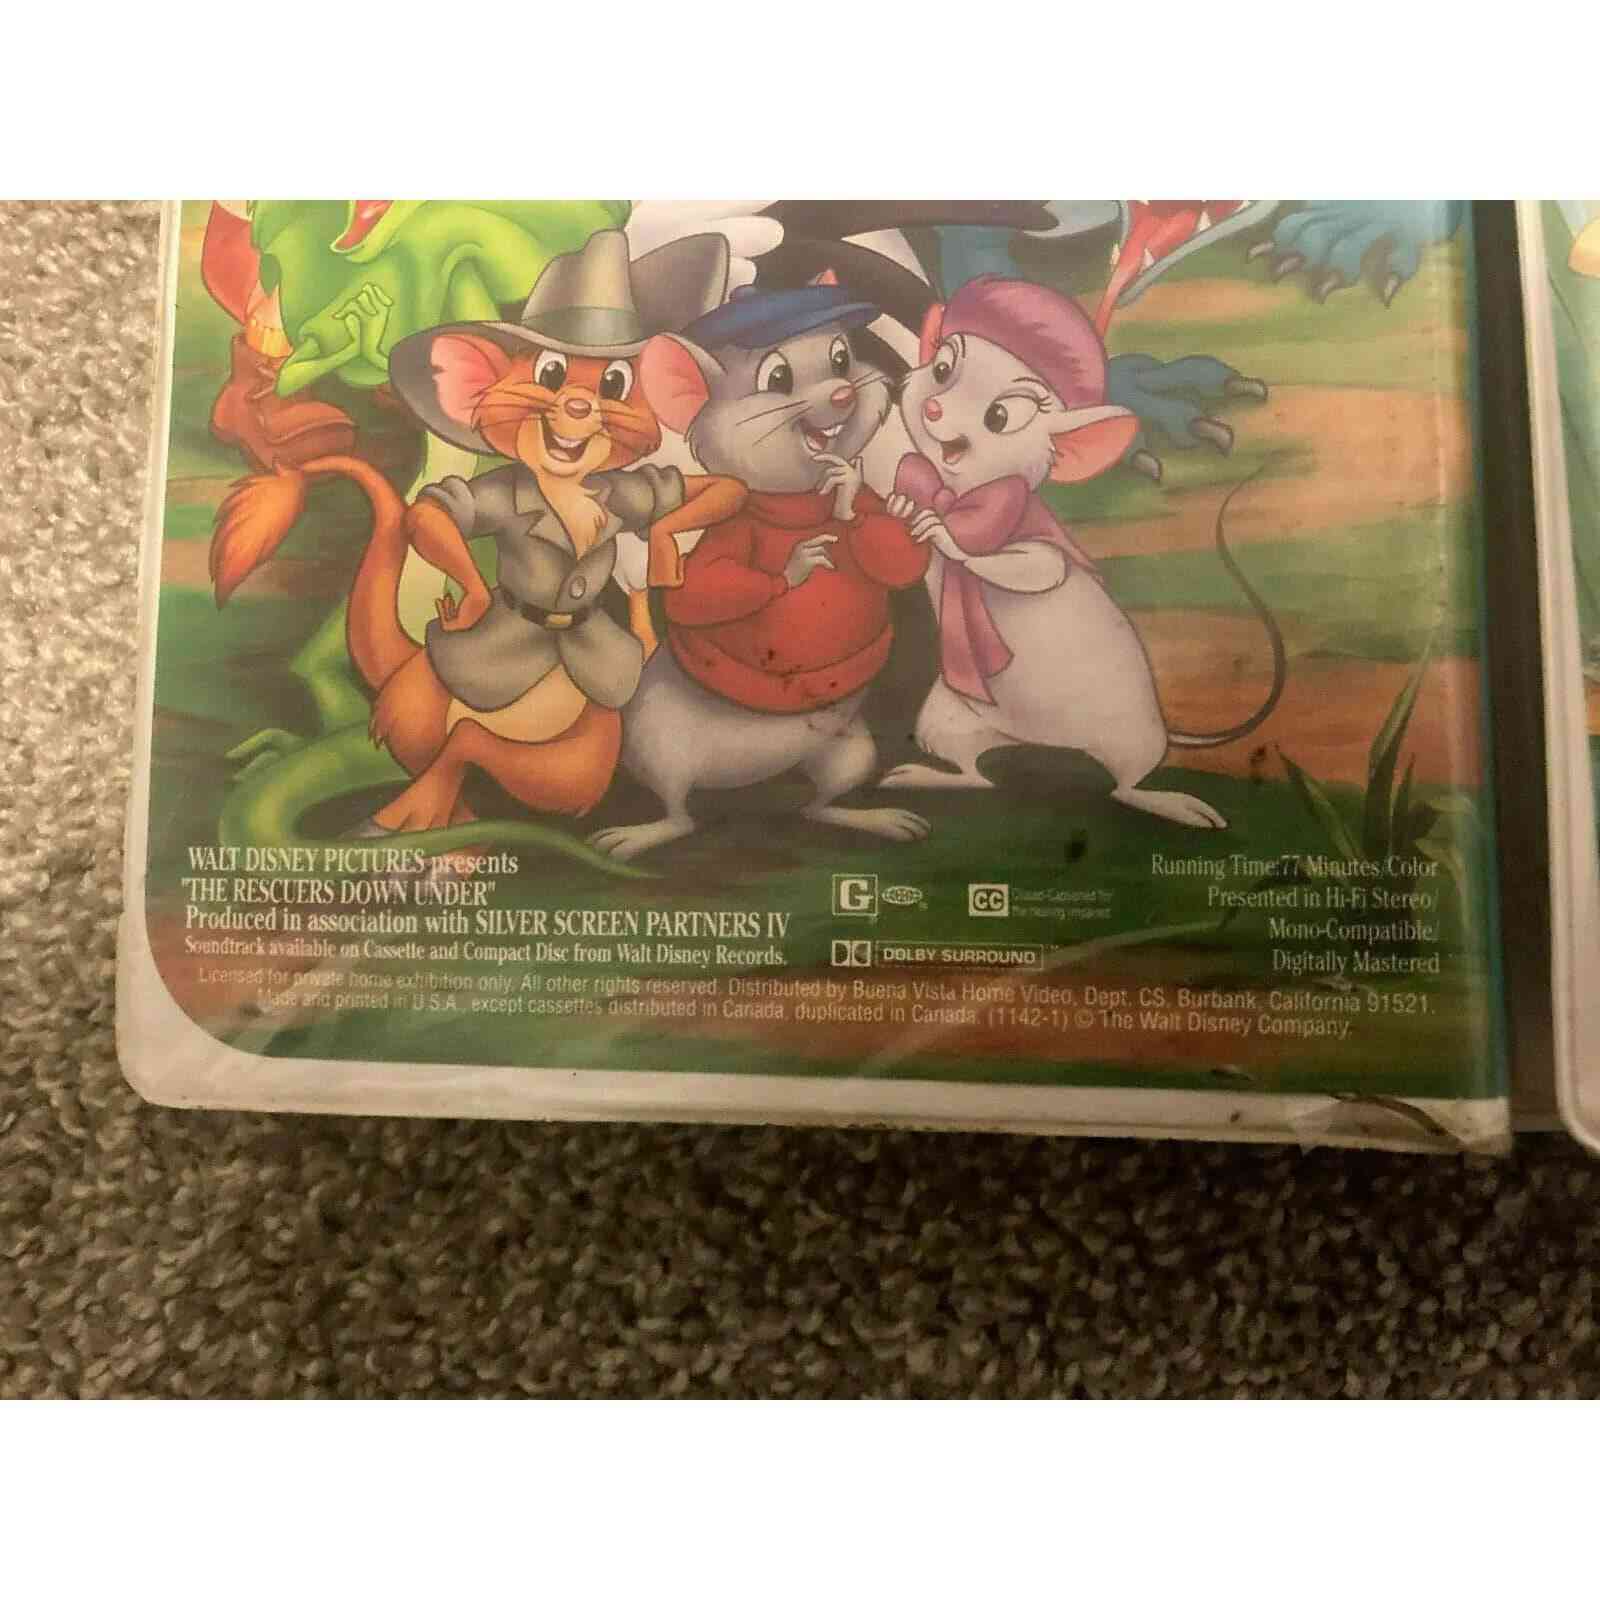 The Rescuers + Down Under (VHS, 1991, 1992) BooksCardsNBikes